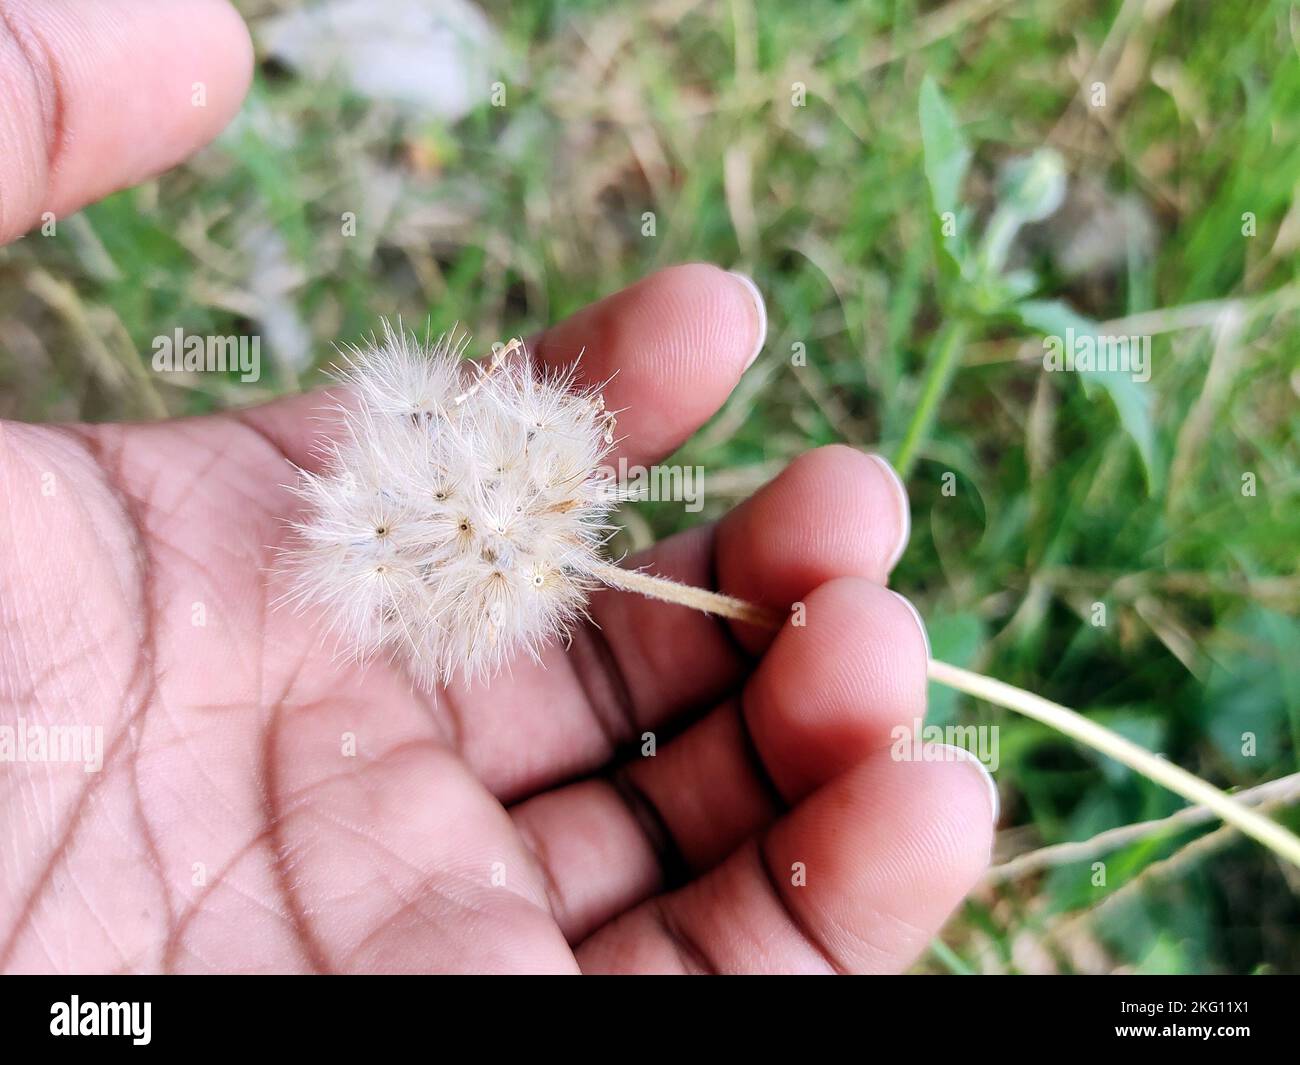 Tridax Daisy closeup holding in a hand Stock Photo